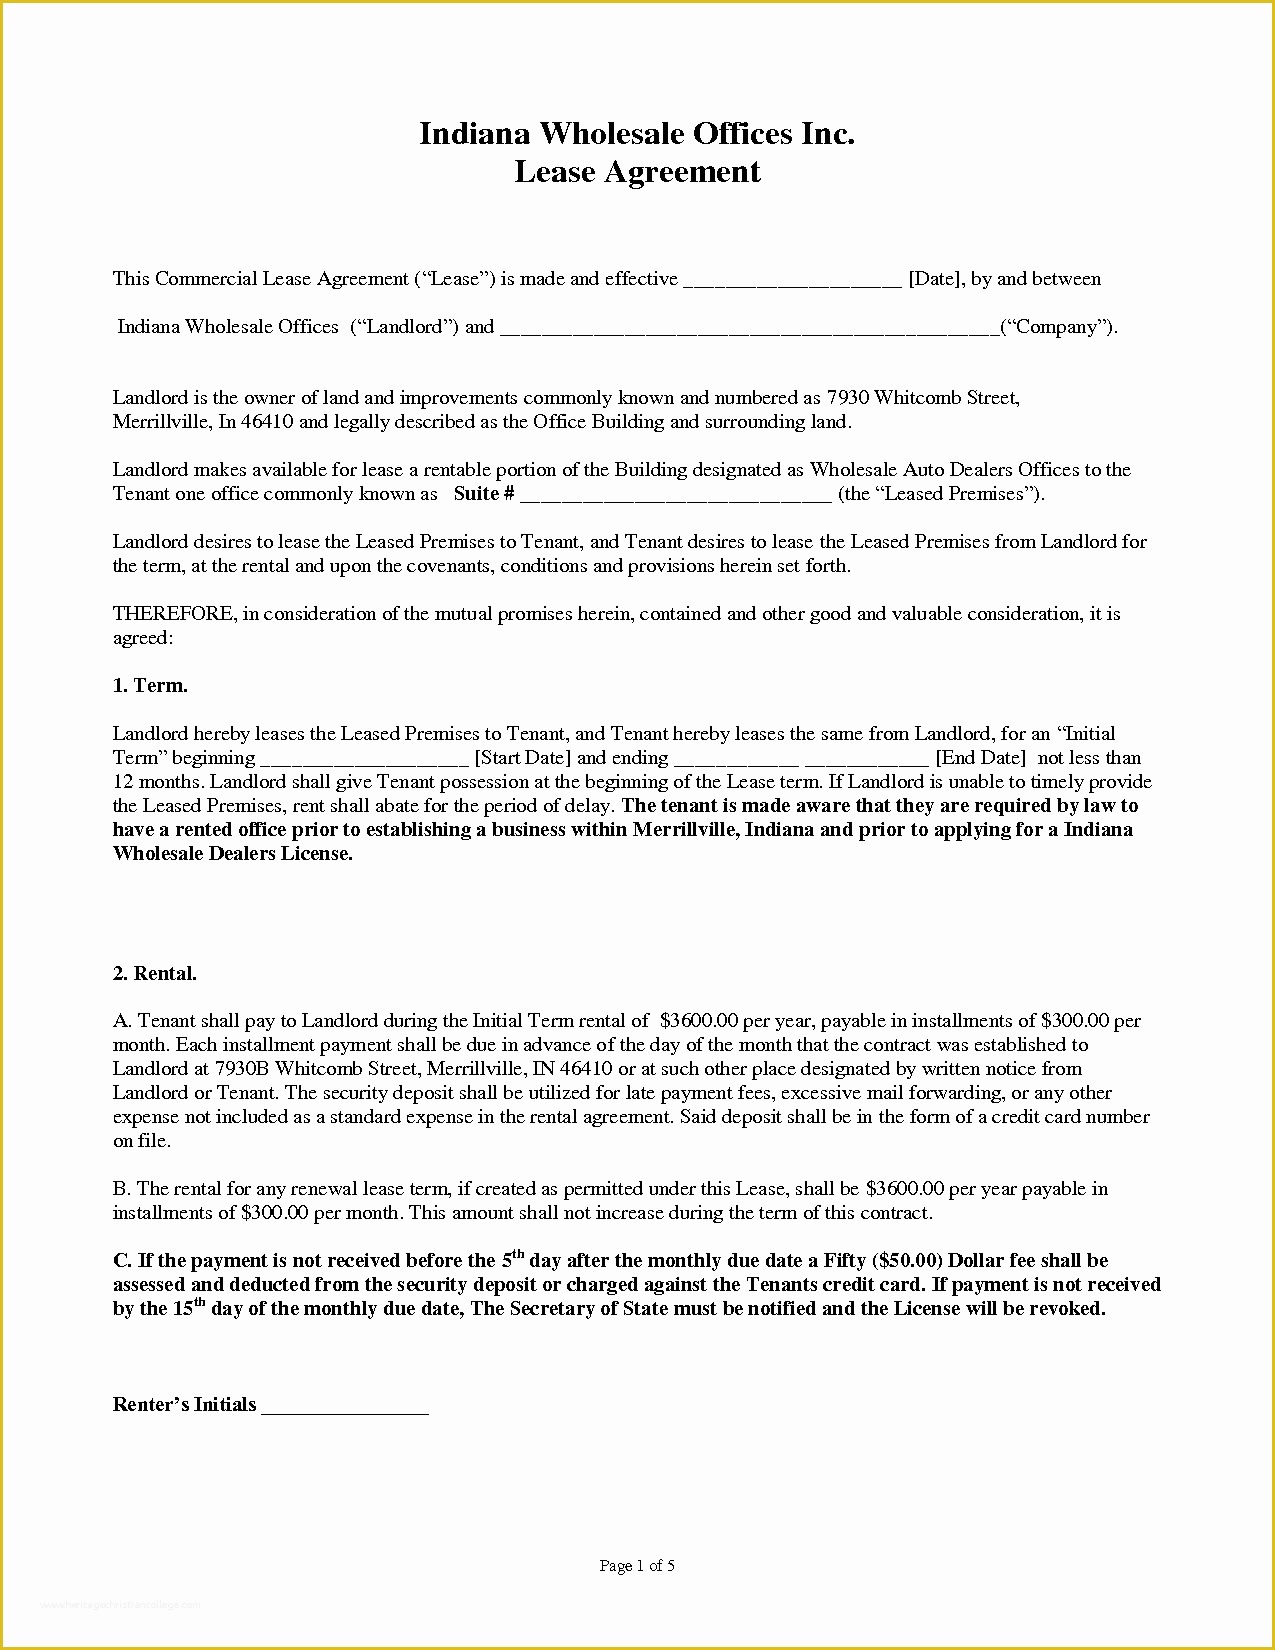 Free Commercial Rental Lease Agreement Templates Of 13 Mercial Lease Agreement Templates Excel Pdf formats